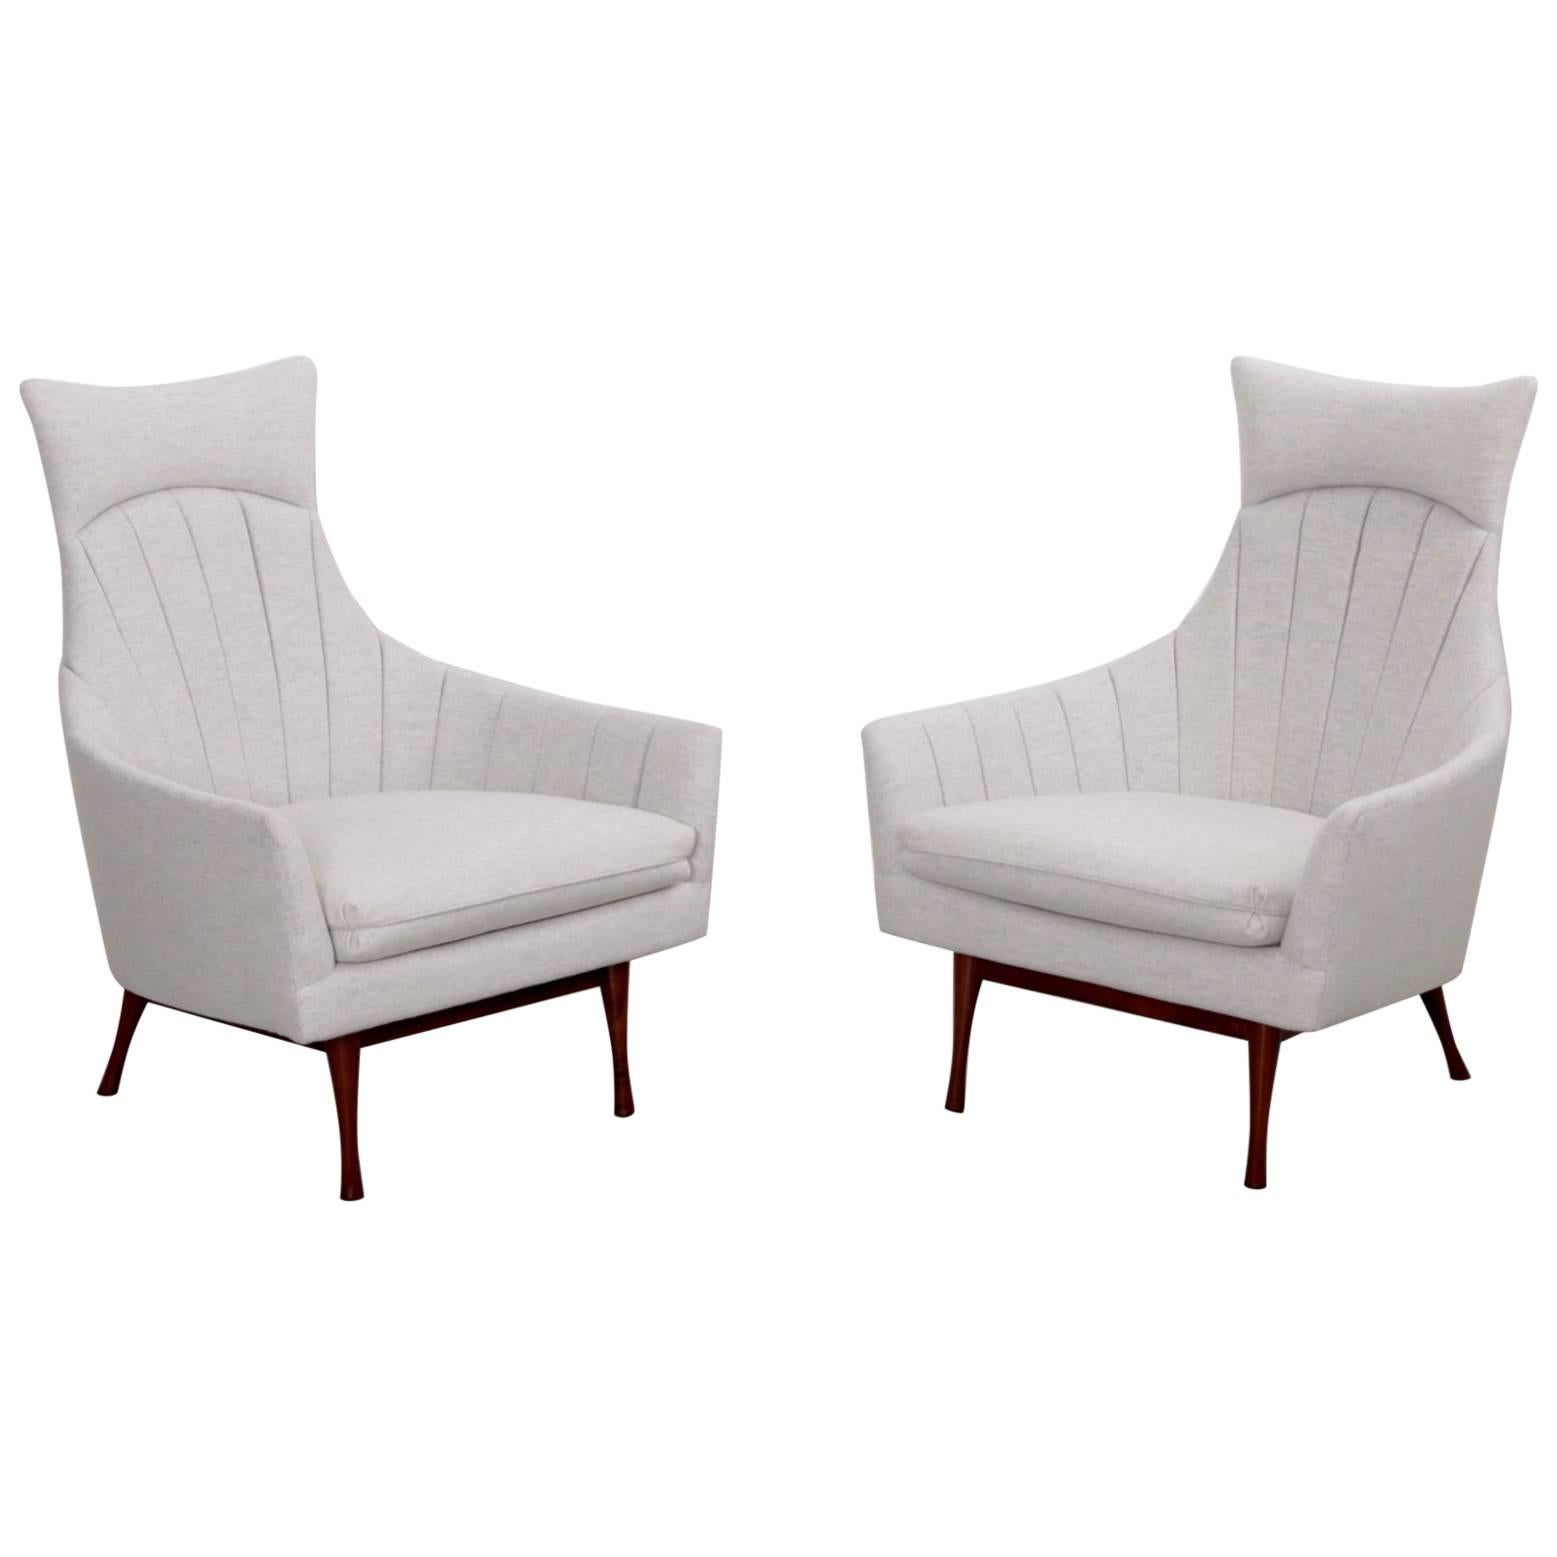 Pair of Paul McCobb Symmetric Group Lounge Chairs by Widdicomb